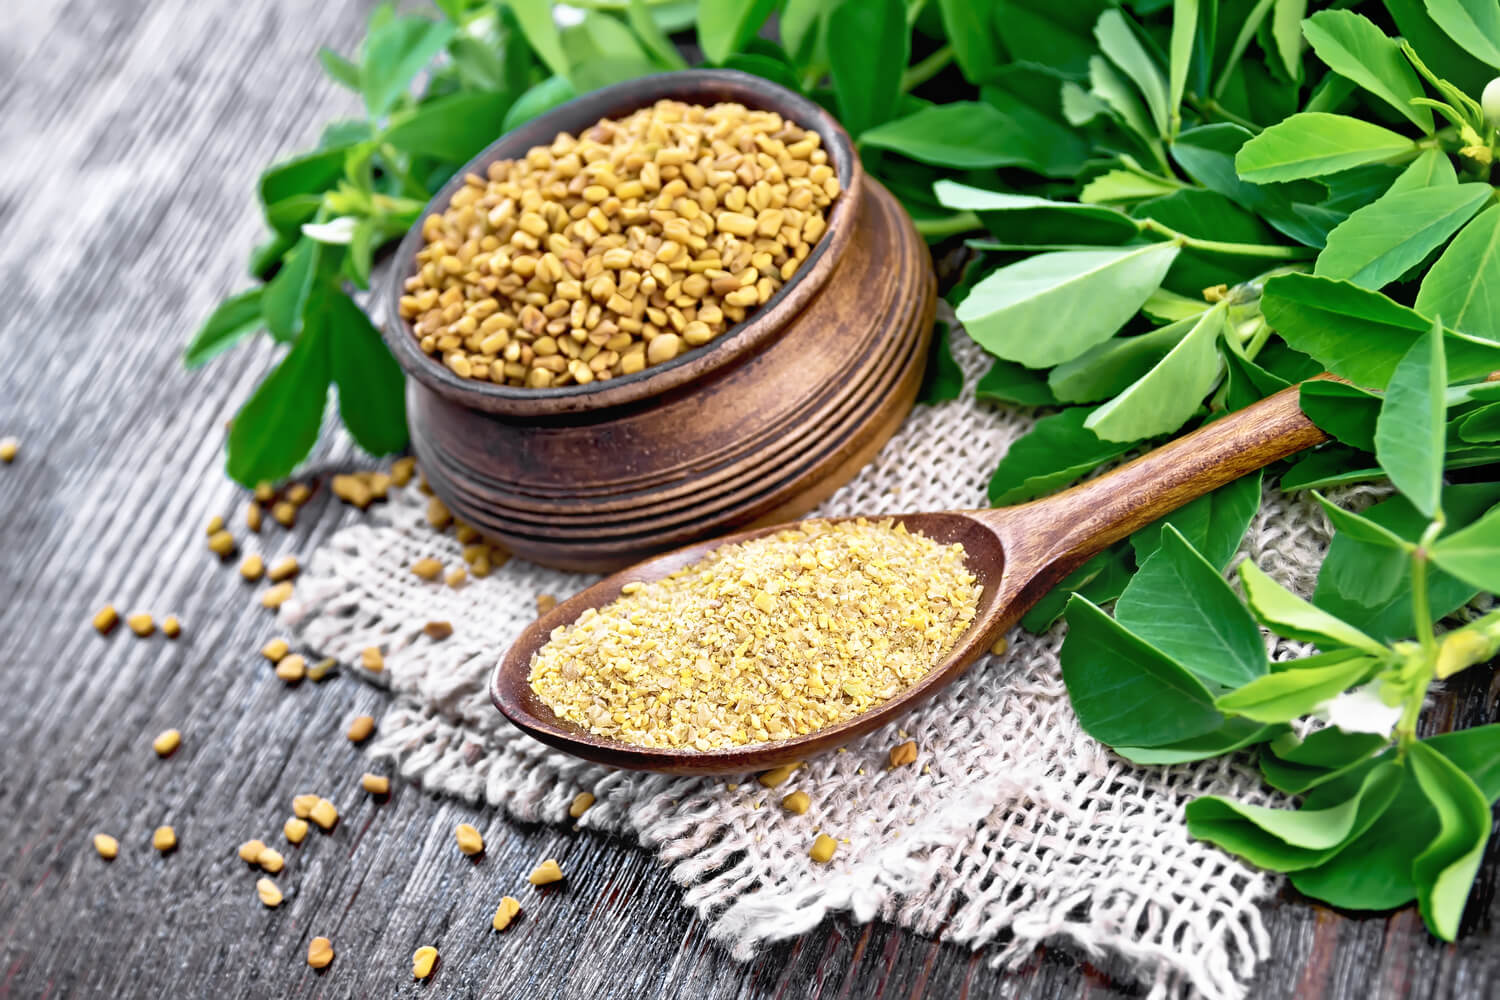 How To Use Fenugreek Seeds To Increase Breast Milk